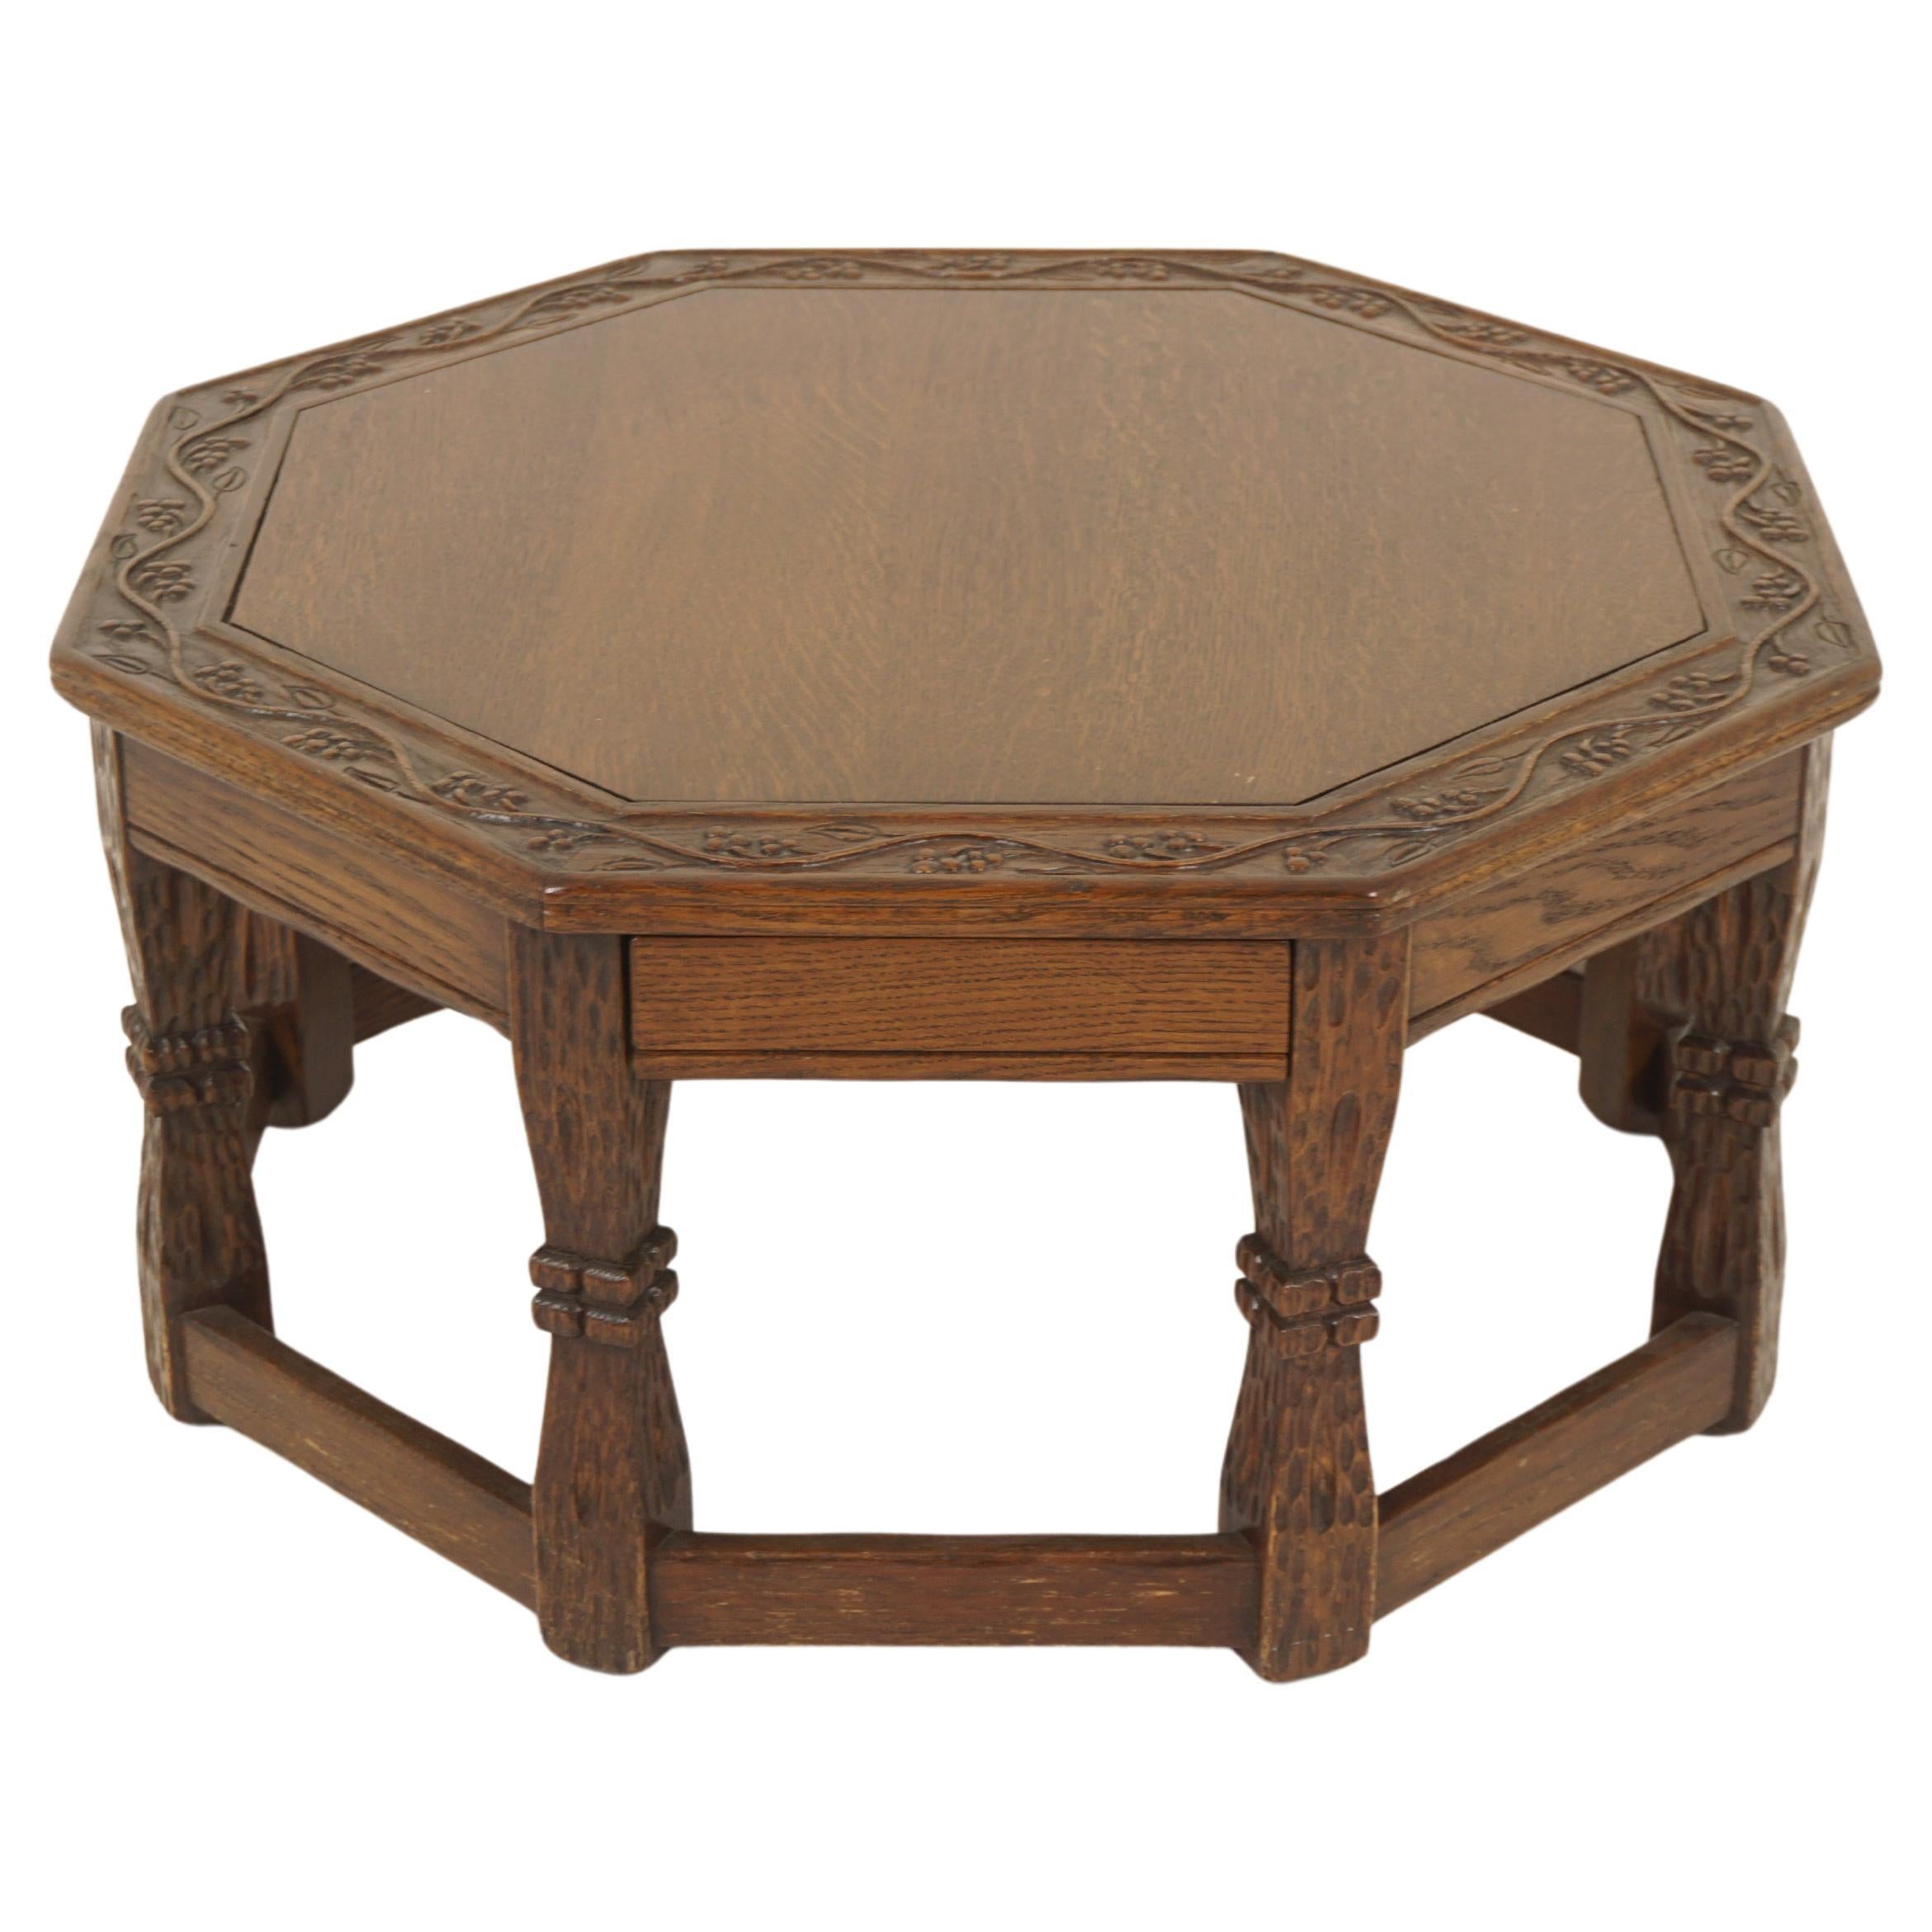 Vintage Carved Oak Octagonal Coffee Table With Drawer, American 1950, H1196